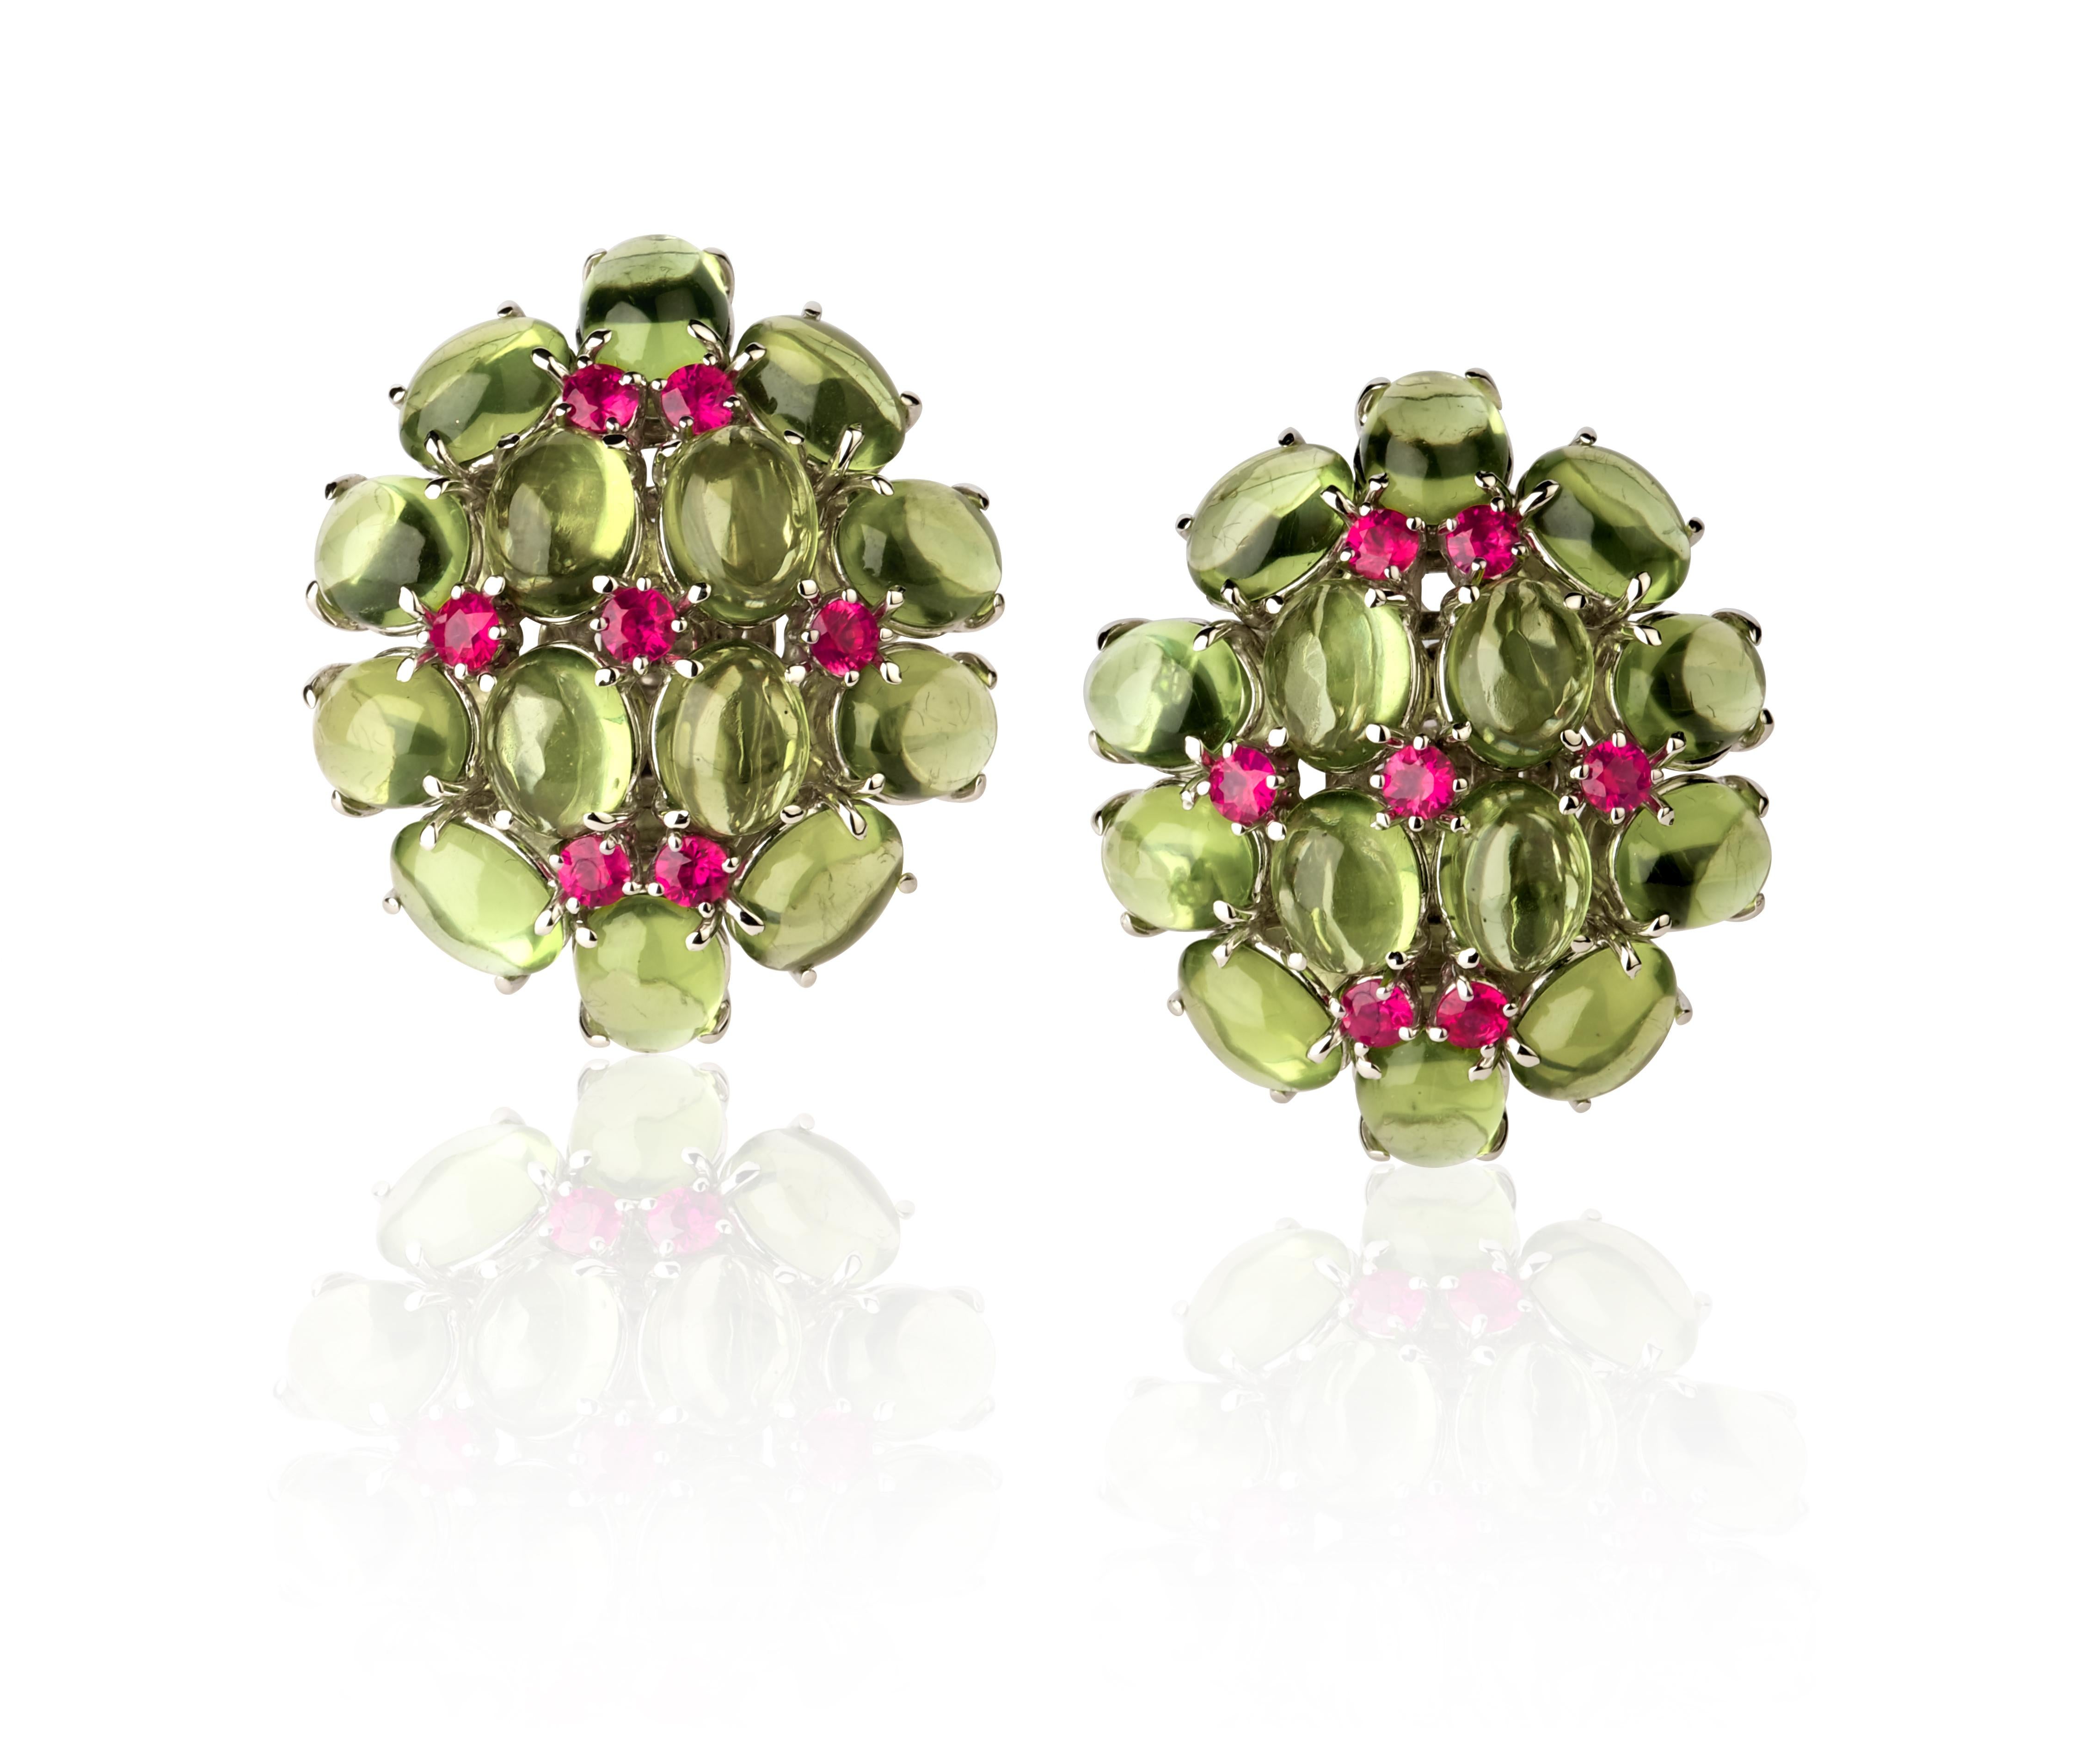 Classical Roman Vintage Oval Earrings ANGELETTI PRIVATE COLLECTION Gold Peridots Pink Sapphires For Sale